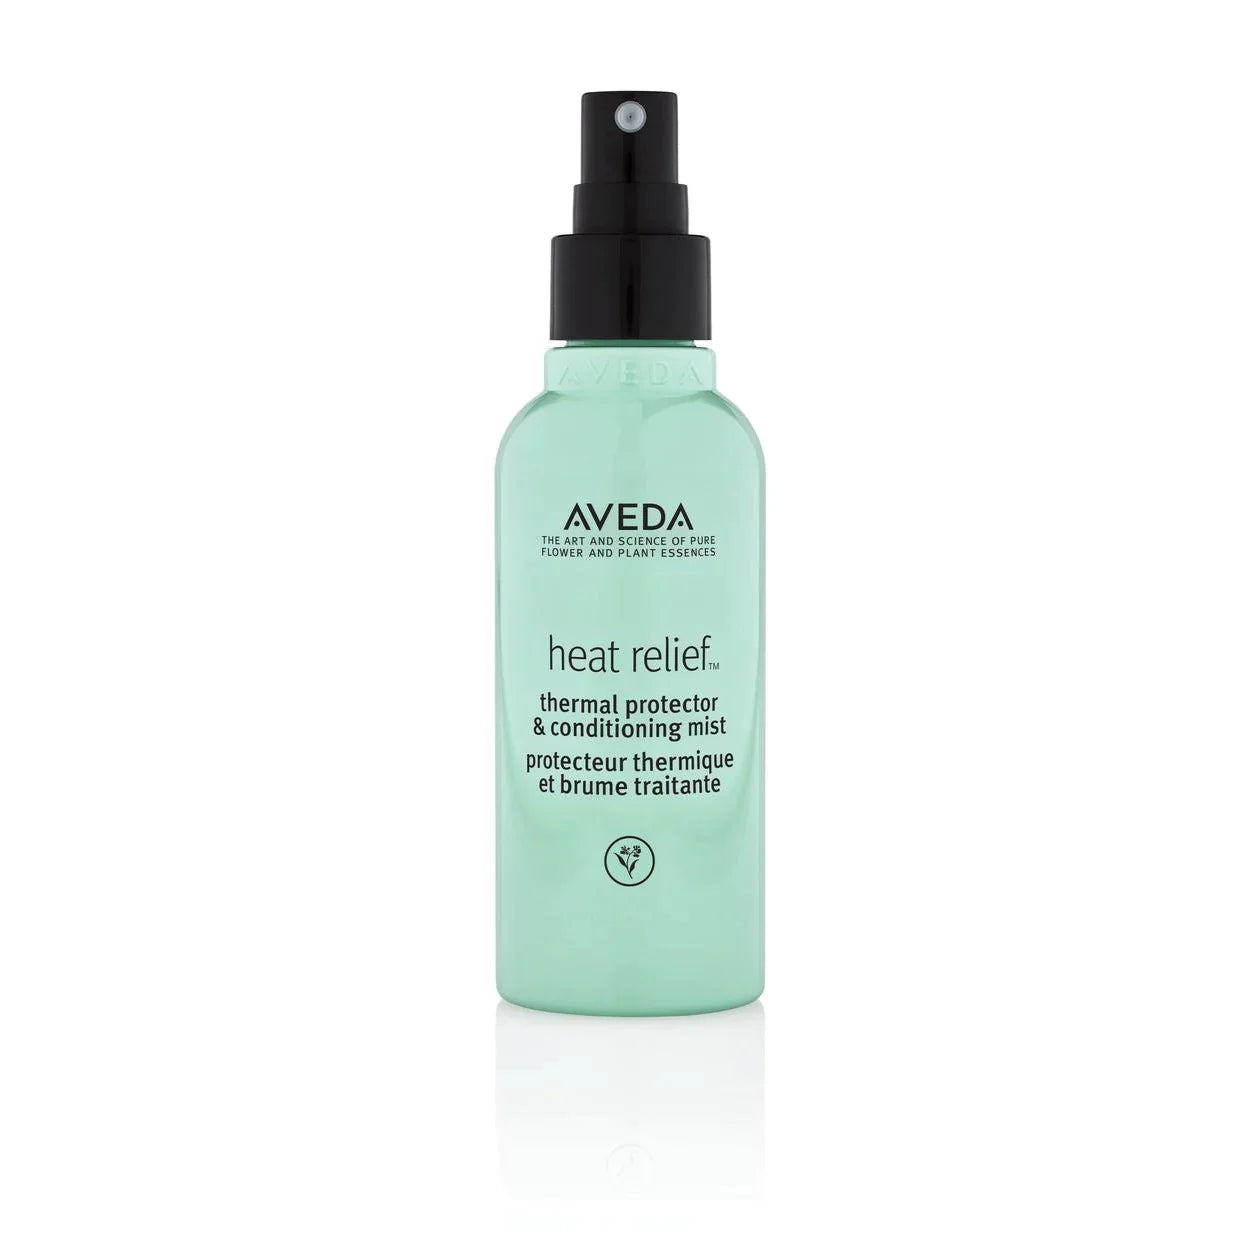 Aveda Heat Relief Thermal Protestor and Conditioning Mist - 100ml - Glow Addict Luxe